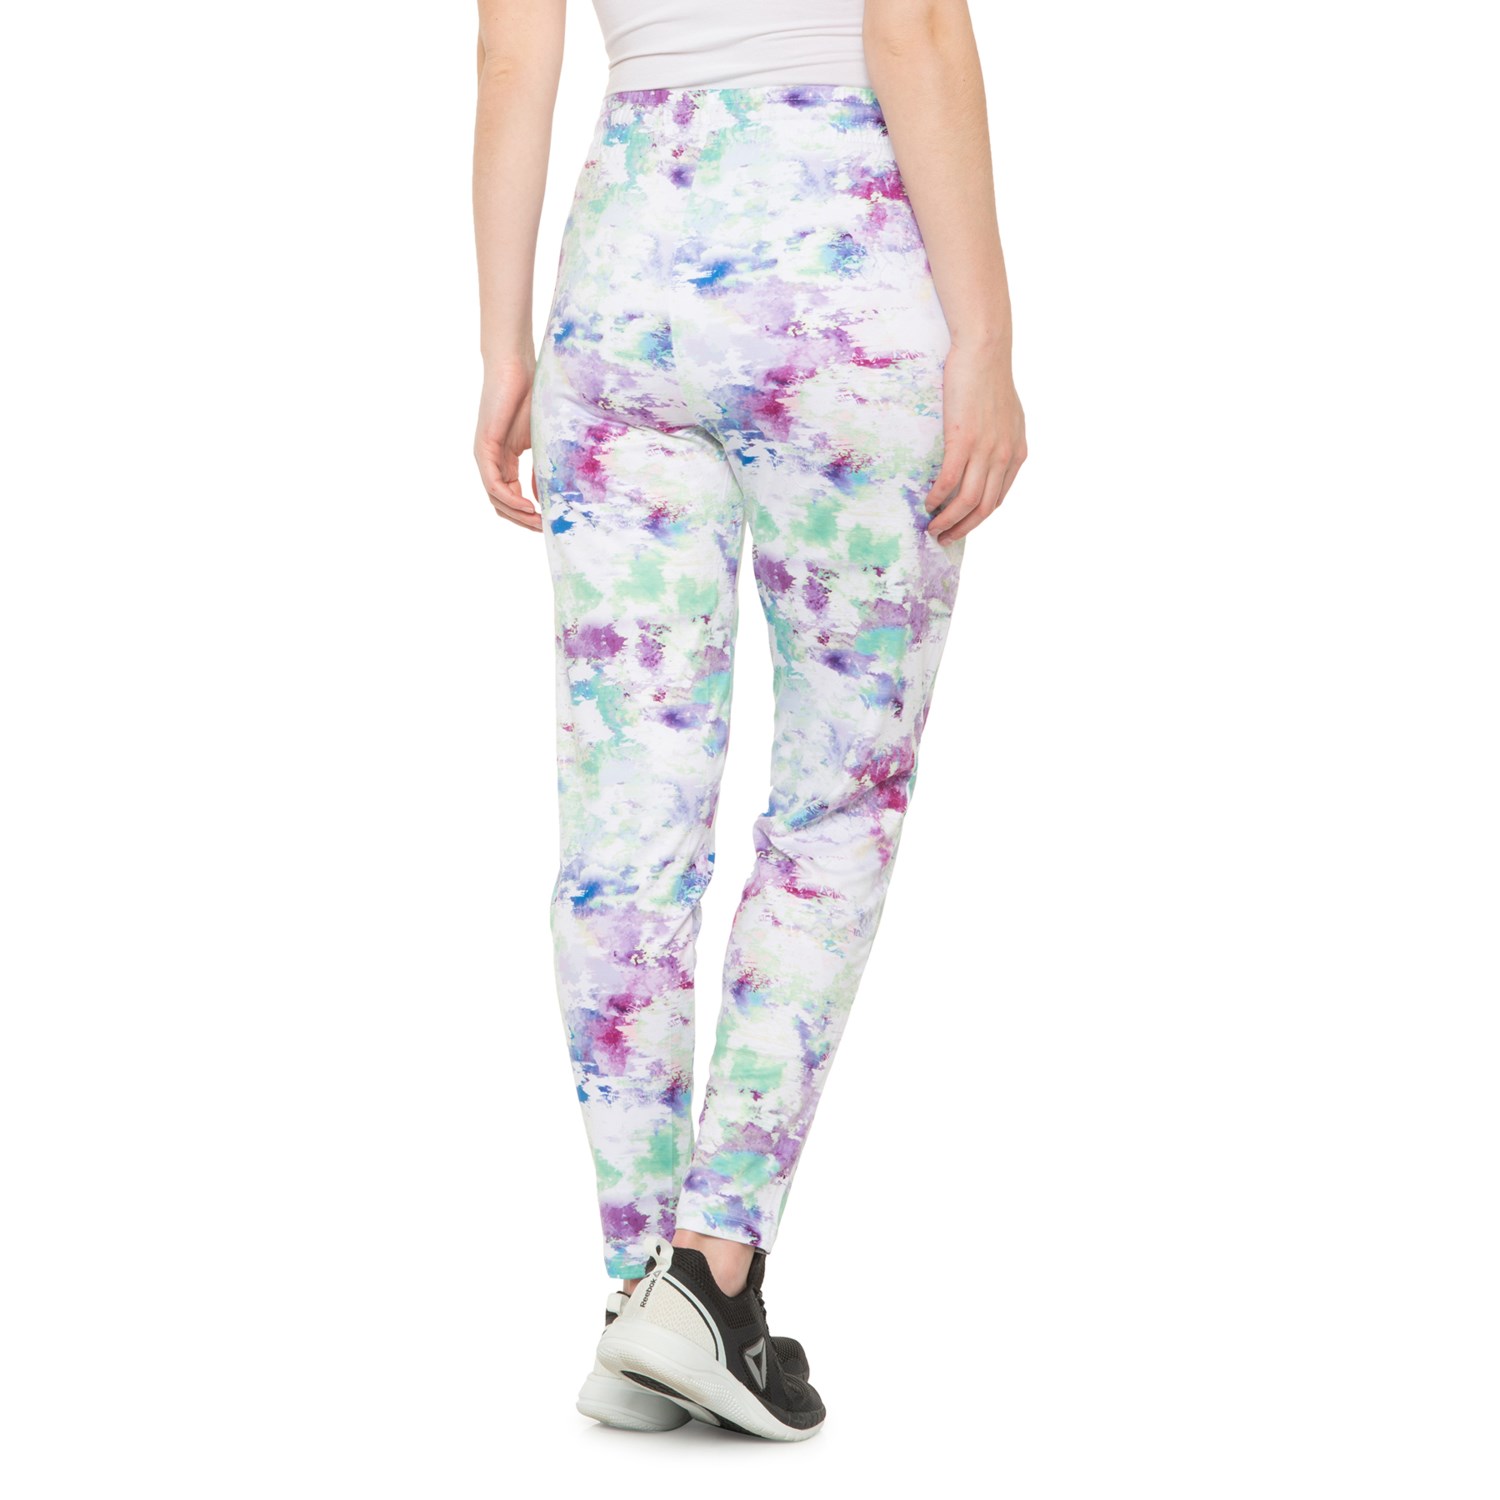 Kyodan Inked Moss Jersey Joggers (For Women) - Save 64%